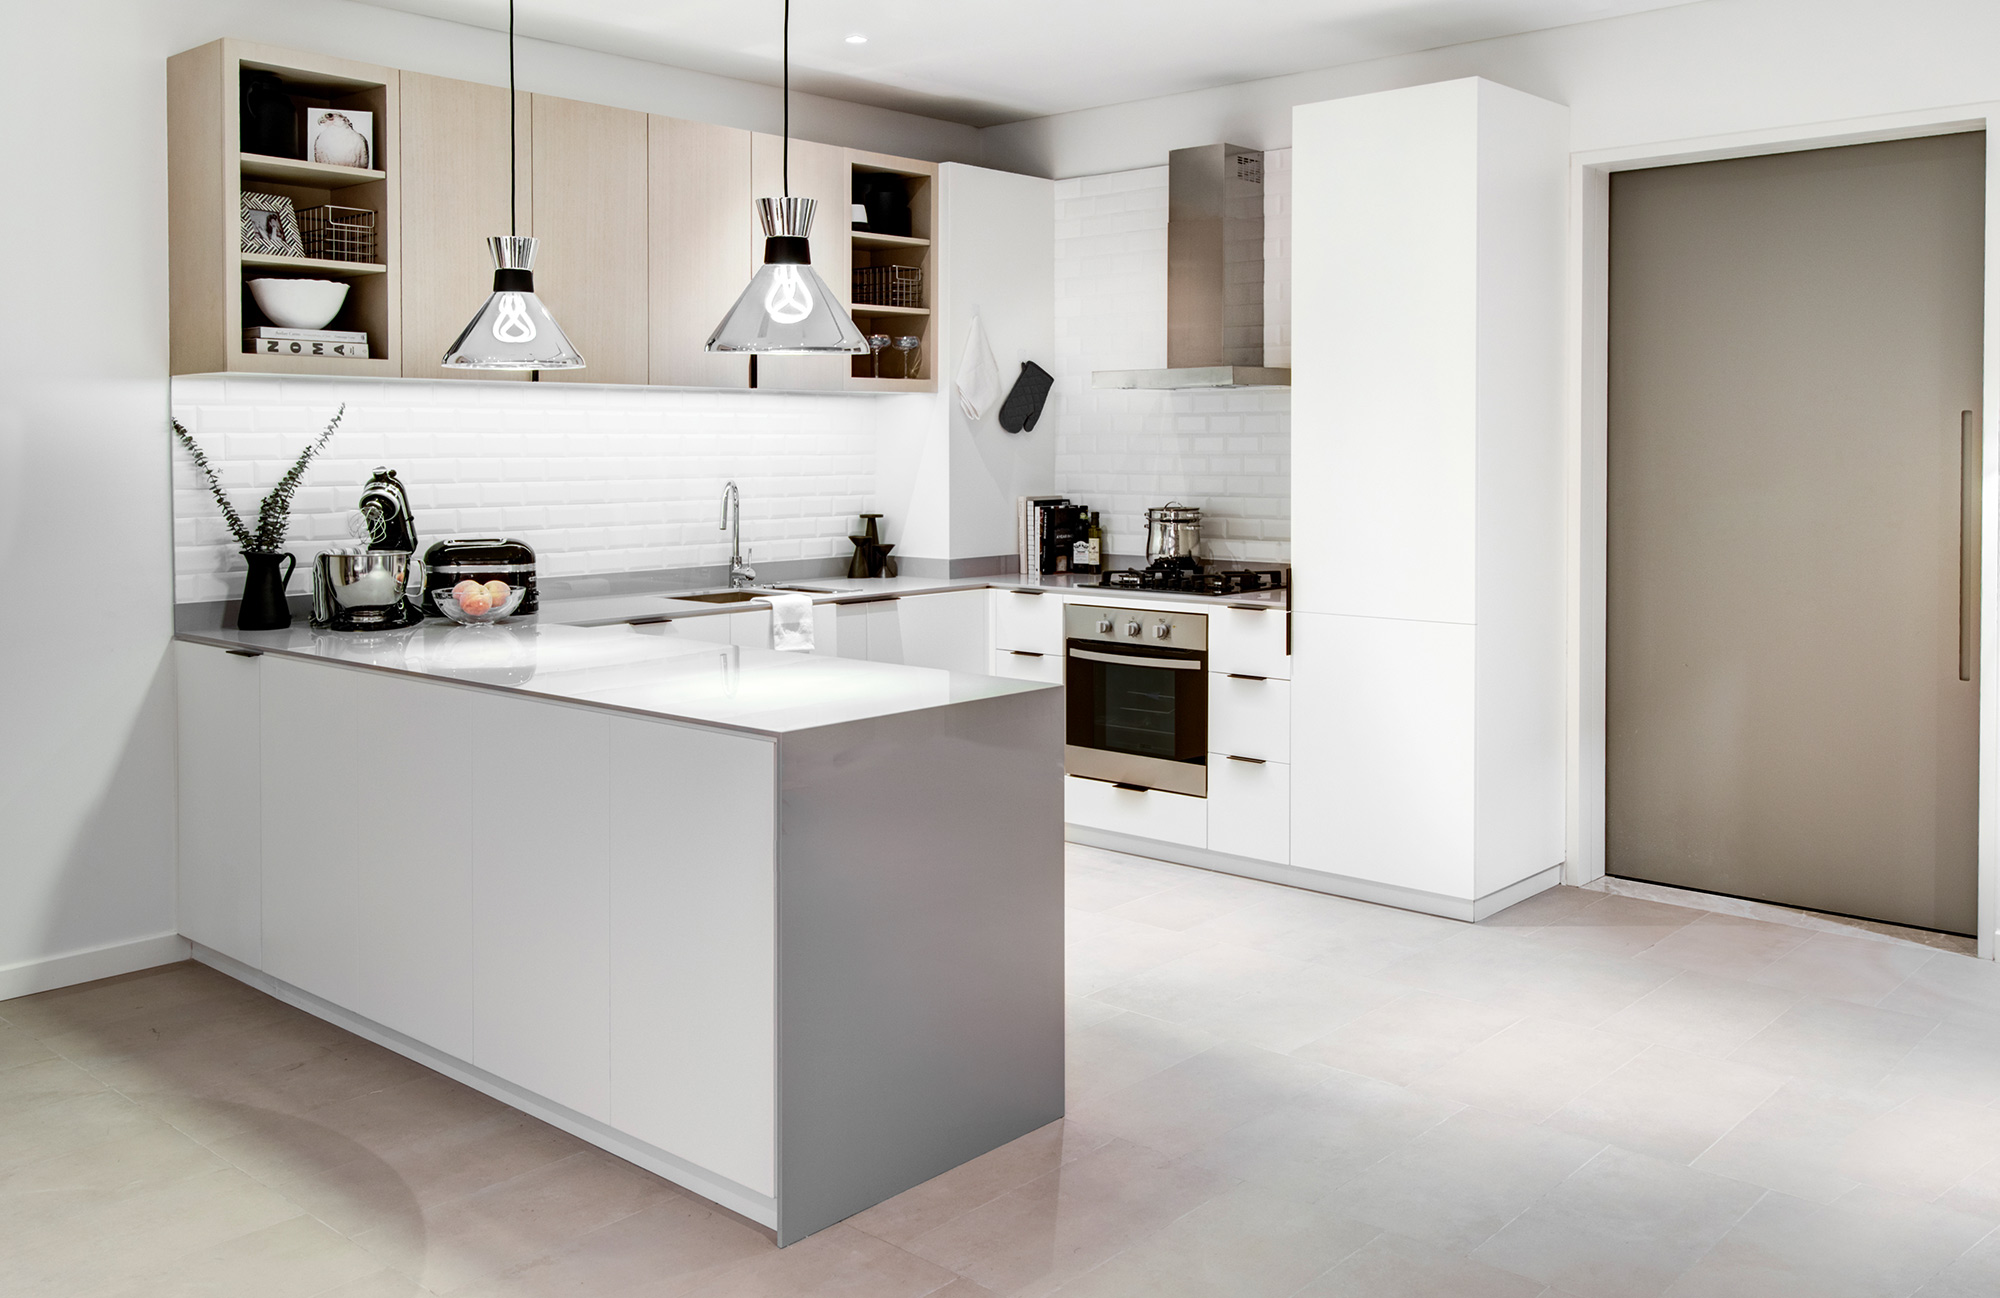 Image of Belgravia Heights I Show Apartment Kitchen in Asymmetrical seams across the entire worktop - Cosentino